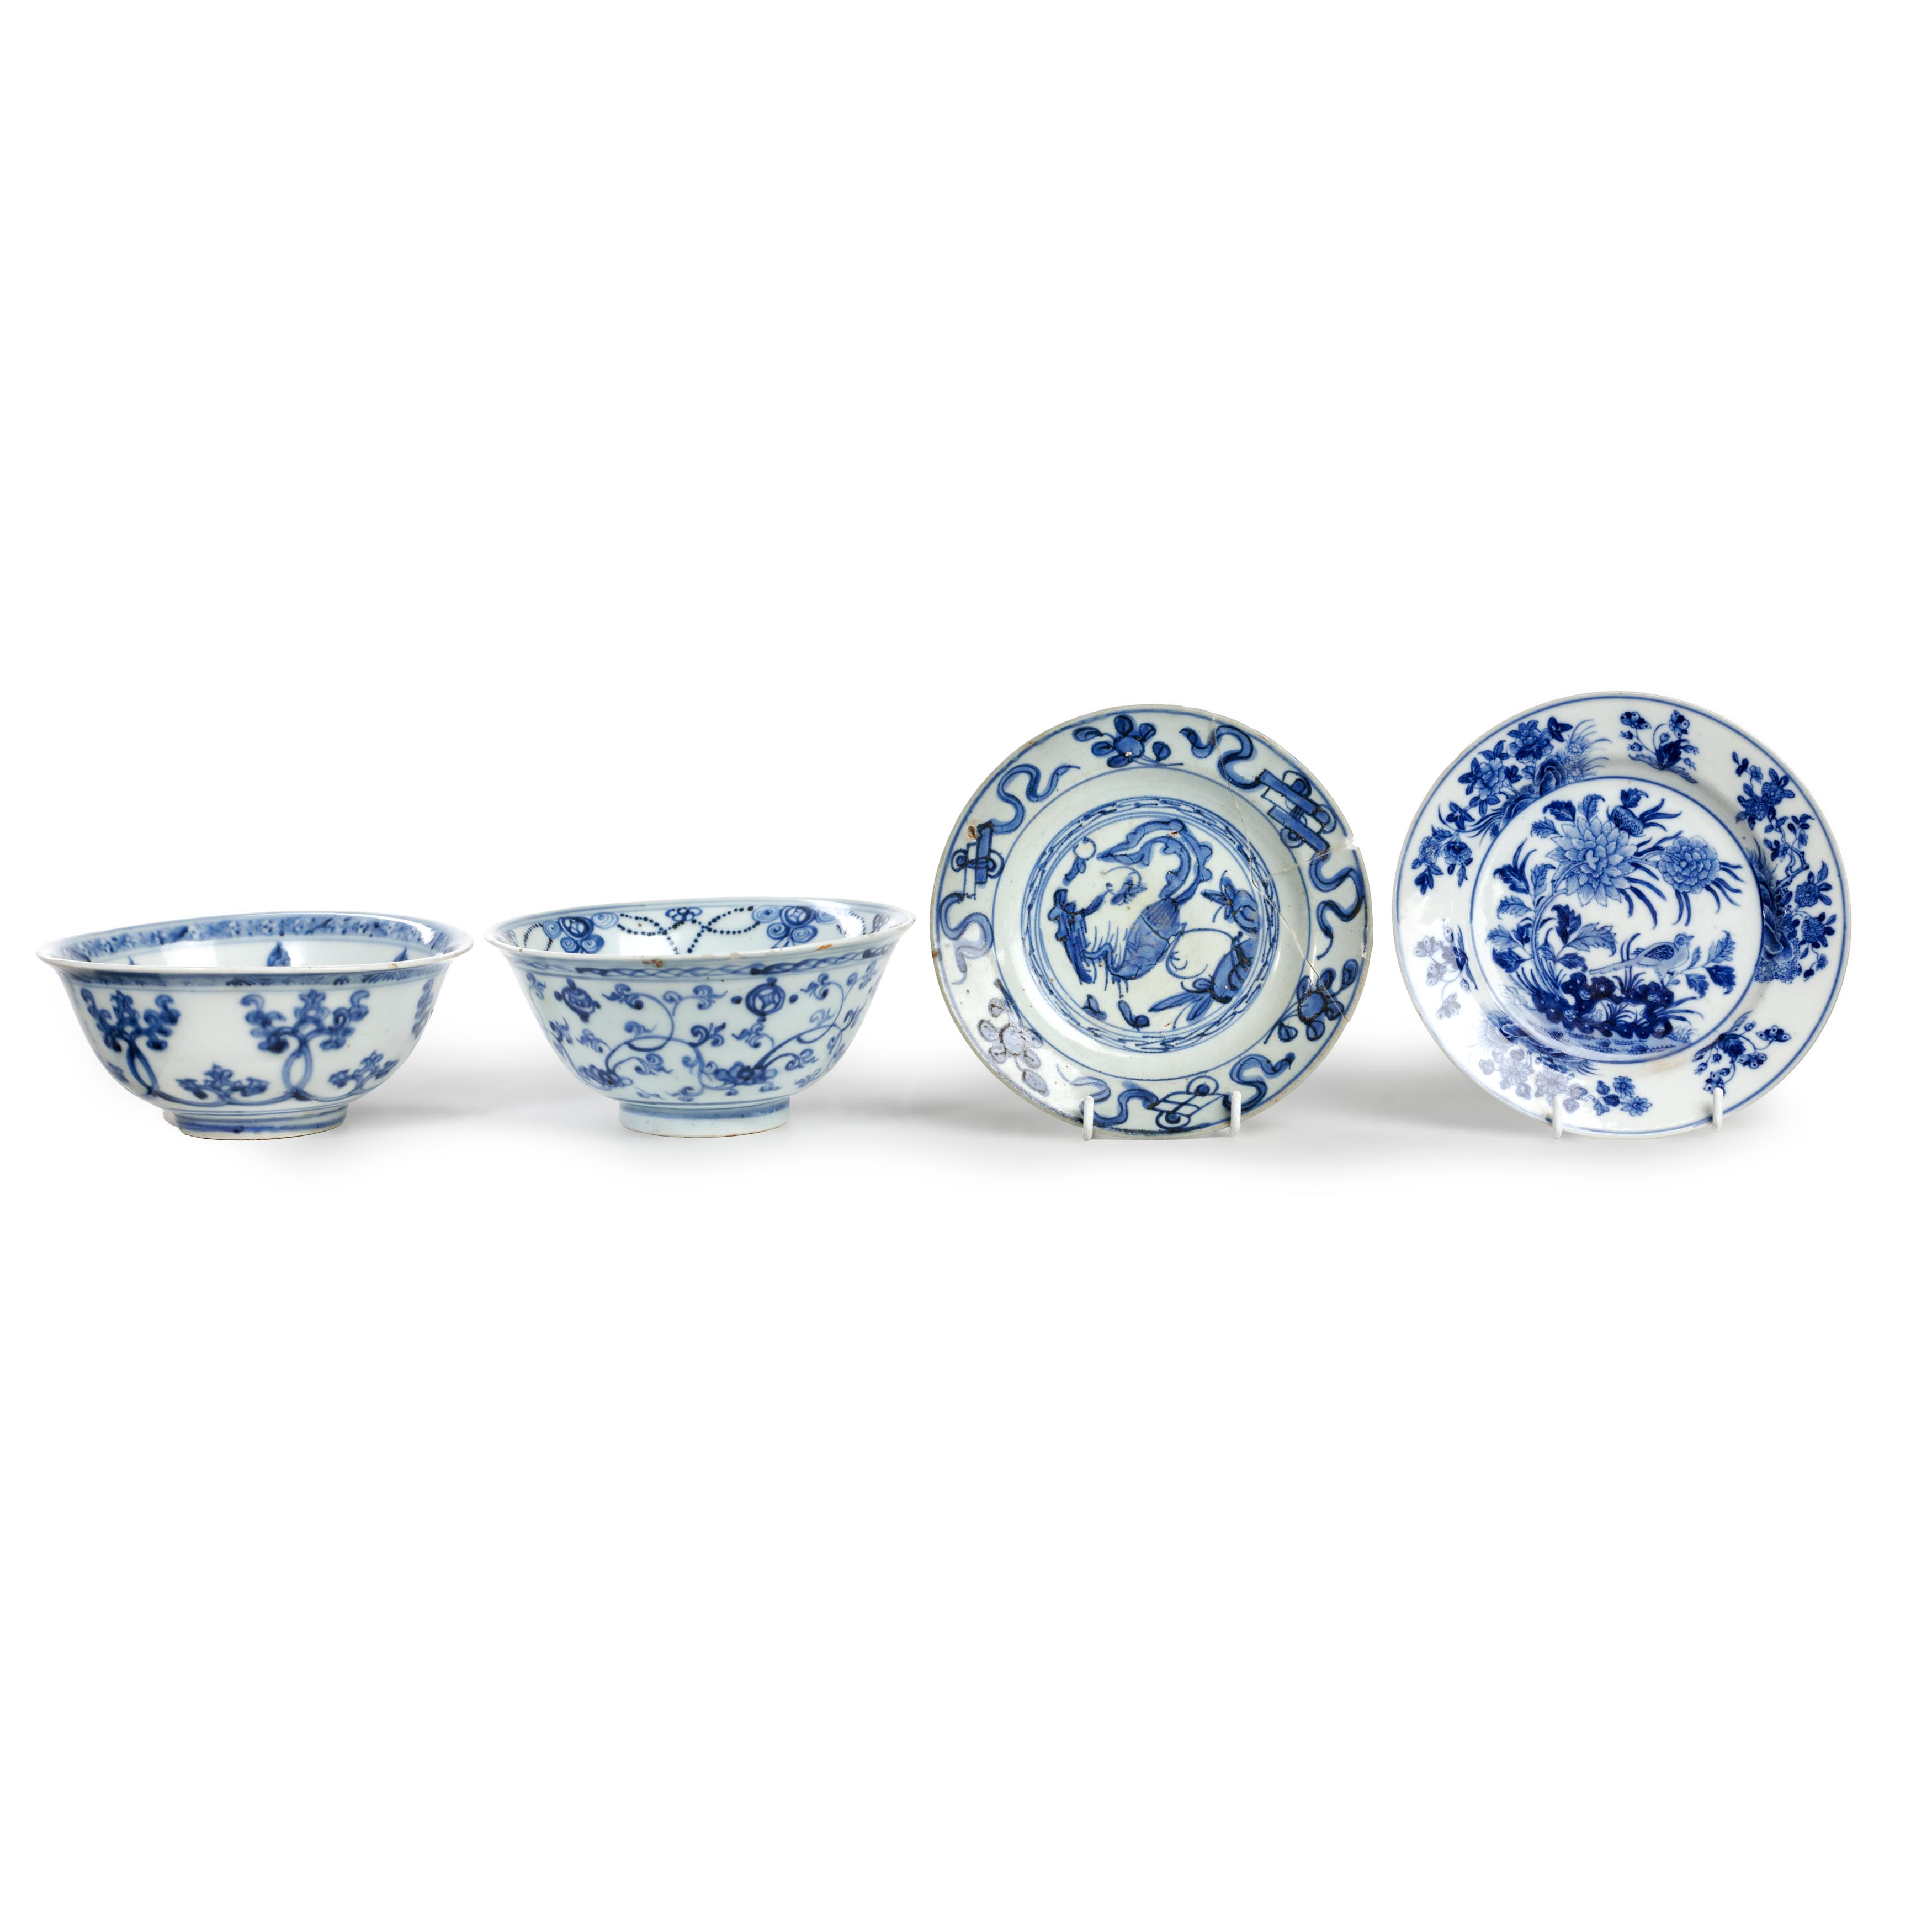 A group of Chinese and Annamese blue and white vessels Ming dynasty, 15th century - Qing dynasty... - Image 2 of 3